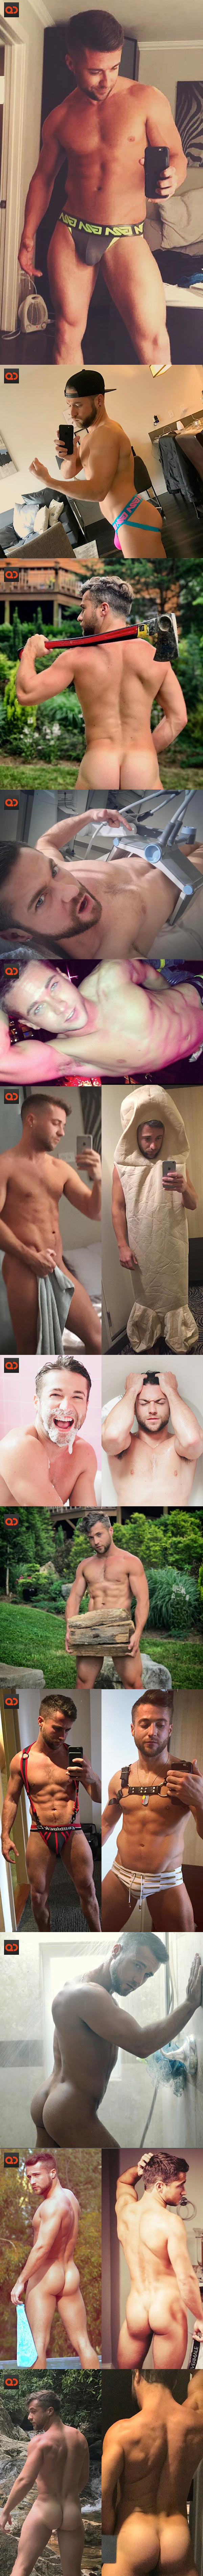 Colby Melvin, Underwear Model, Exposed In Alleged Cock Photo!